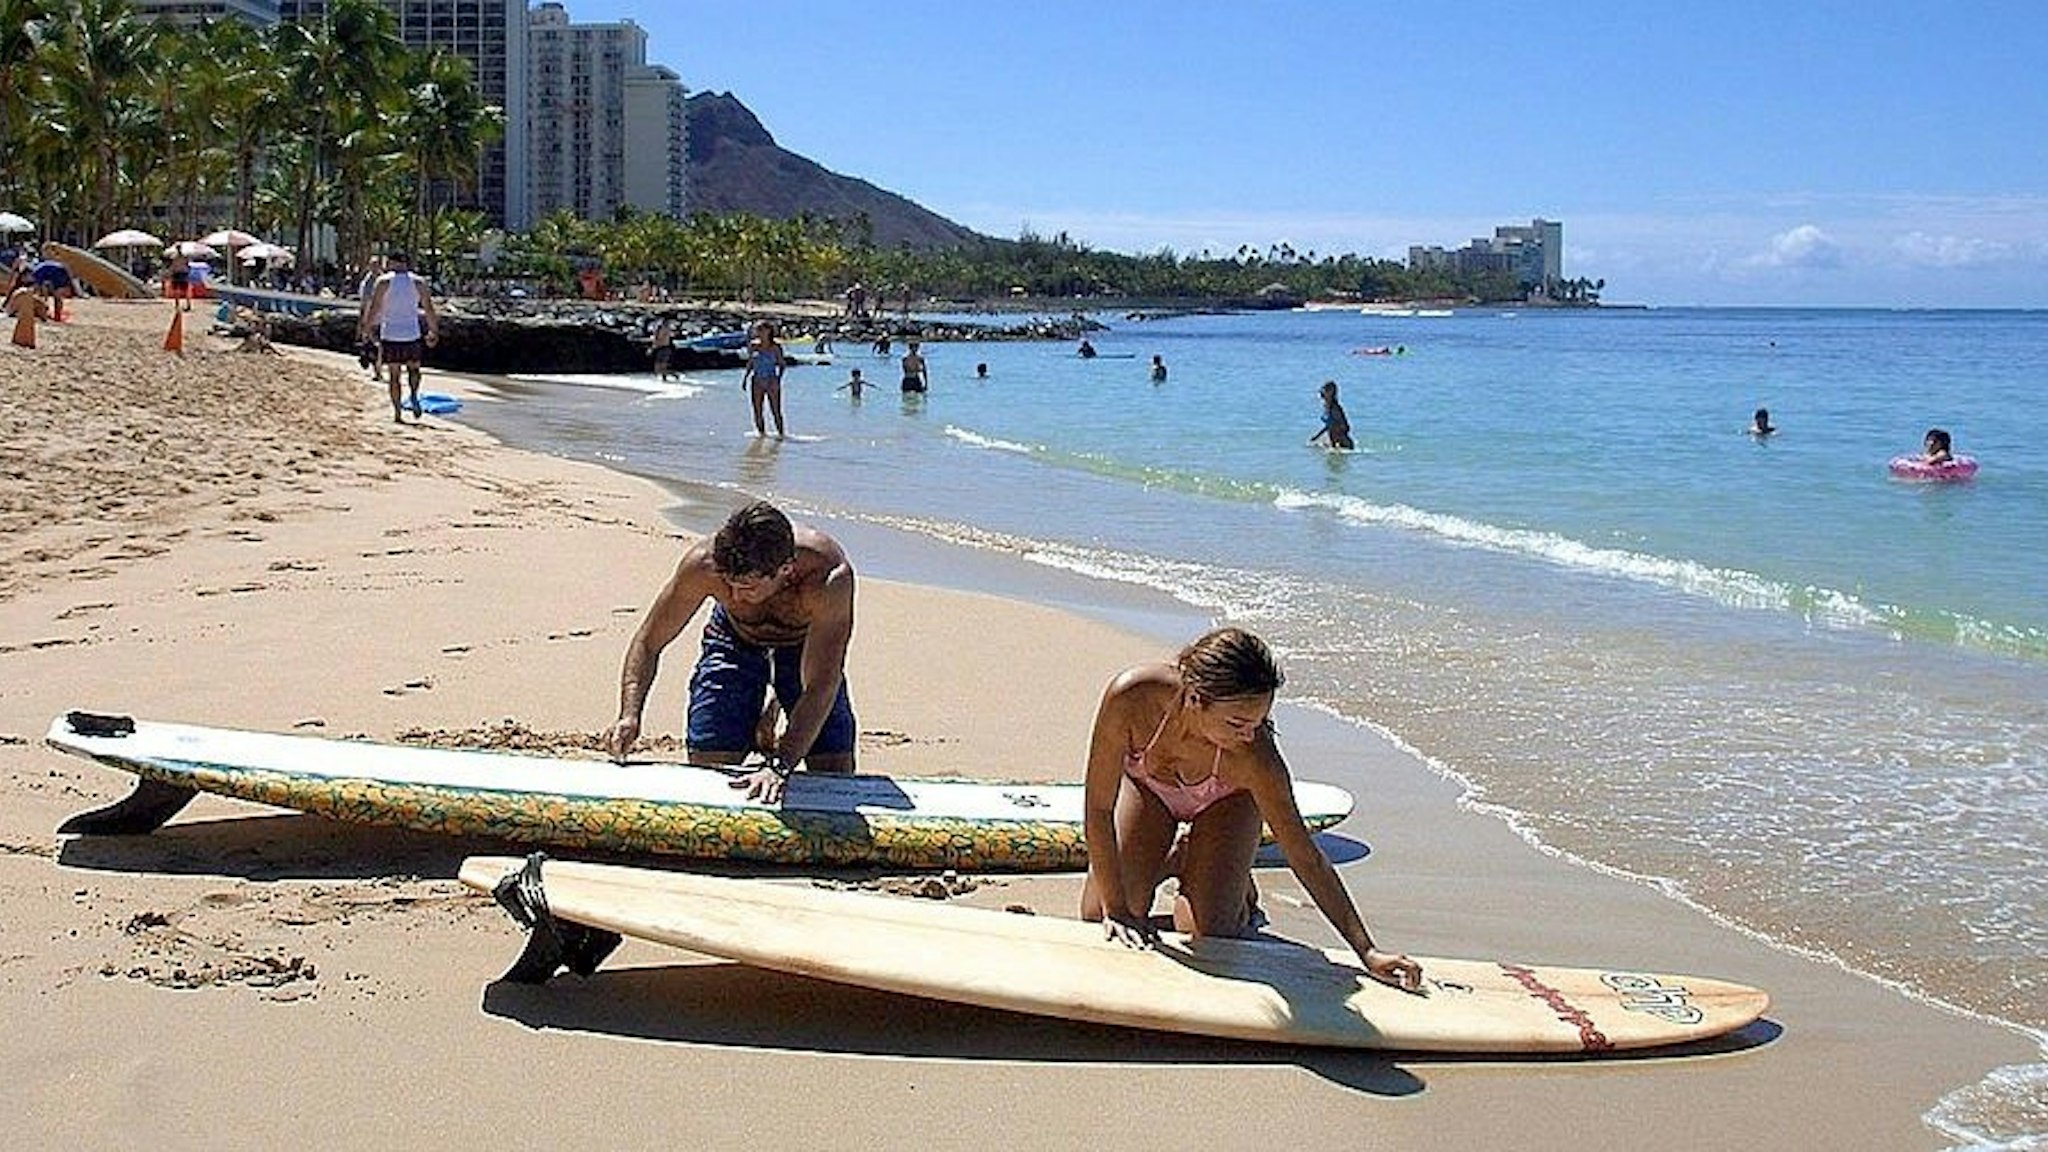 WAIKIKI, UNITED STATES: Scott Herson (L) and Marilyn Shepard (R) of Manhattan Beach, California, wax their surfboards 06 September 2001 on Waikiki Beach in Hawaii near where sharks were sited 05 September afternoon which closed the world famous beach until after sunset. Lifeguards and the crew of a low-flying helicopter used bullhorns to order hundreds of beach goers out of the water after three sharks were spotted, 50 meters from the shore. While there have been no recent shark attacks in Hawaii, the decision to evacuate the beach is indicative of the widespread alarm in the United States of sharks following several recent deadly attacks. The beach reopened after authorities determined that the 9-foot black-tip sharks had left the area. AFP PHOTO/Mike NELSON (Photo credit should read